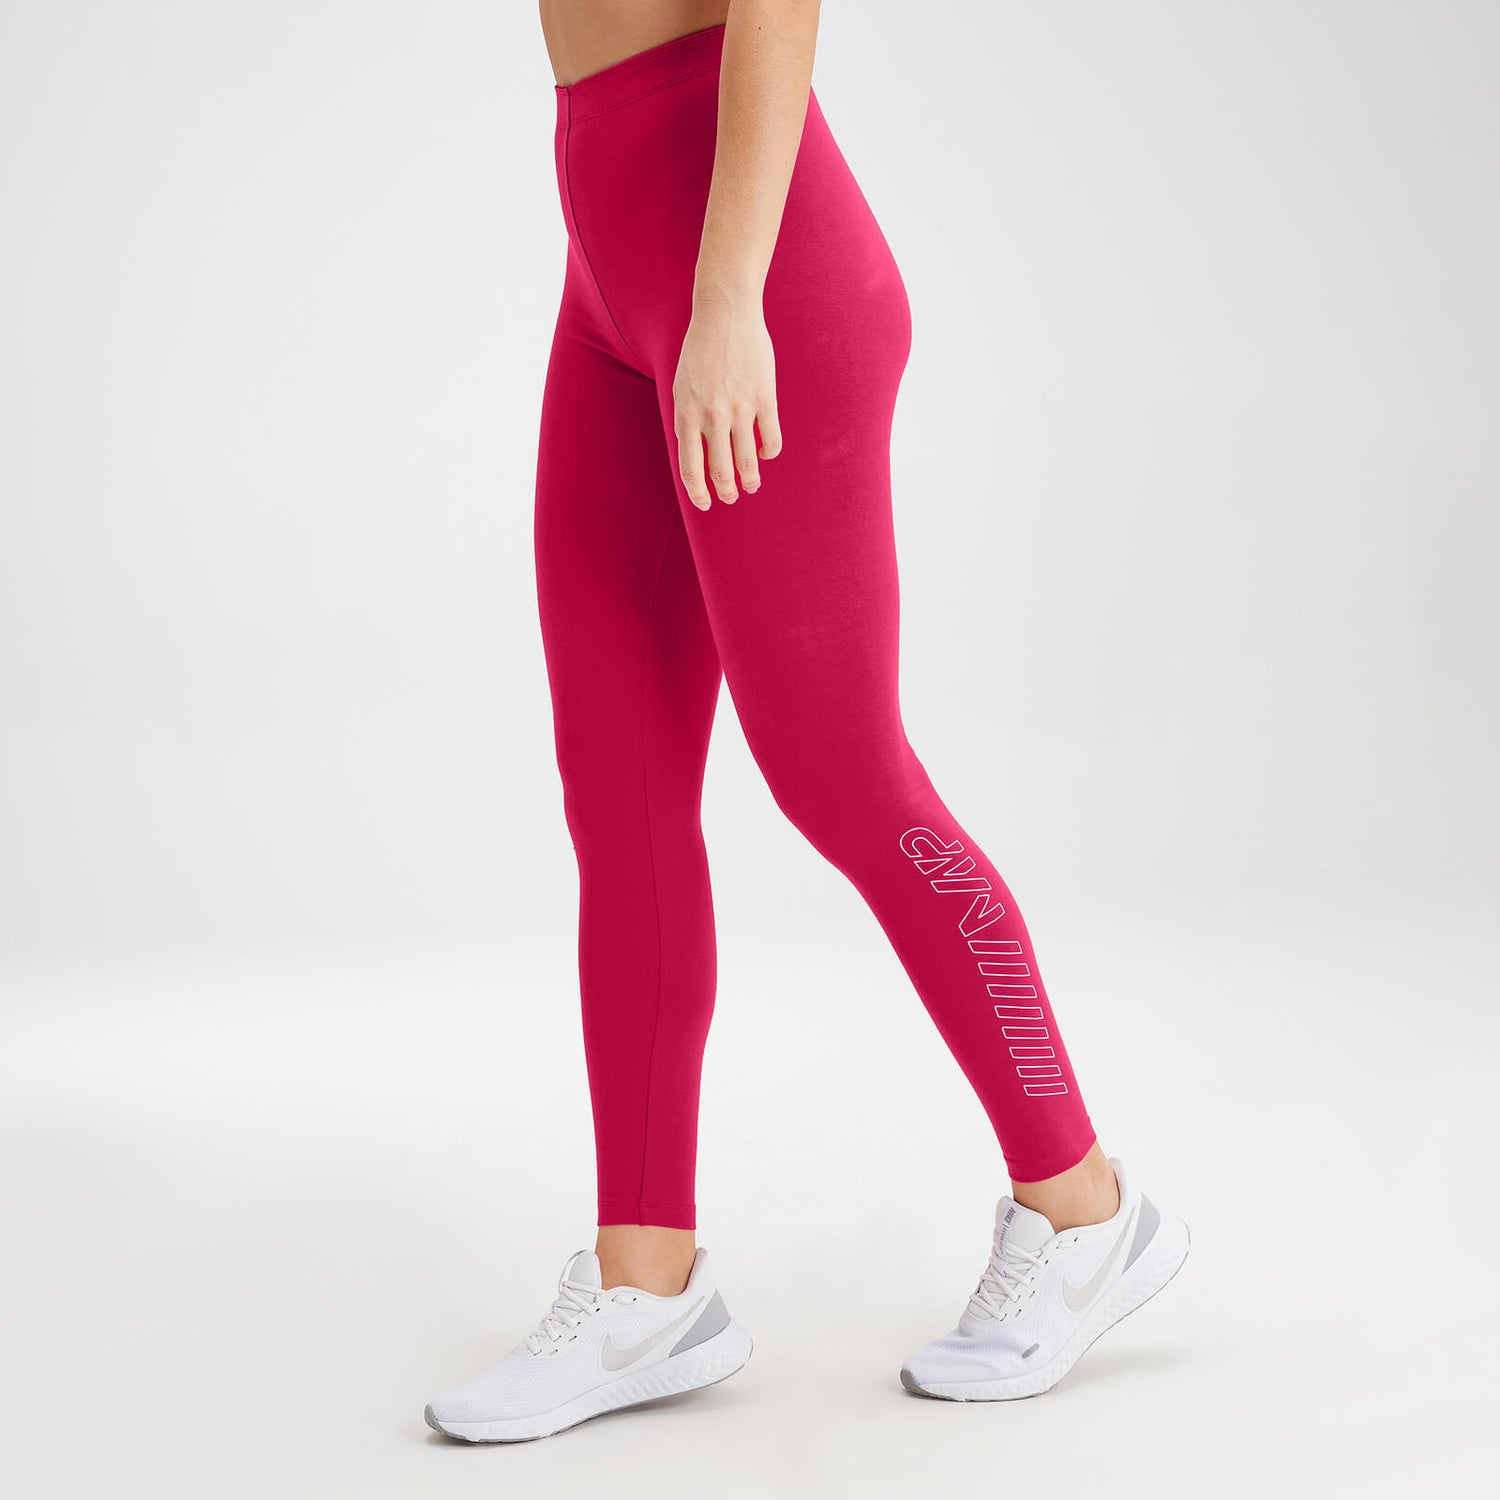 MP Women's Outline Graphic Leggings - Virtual Pink - S